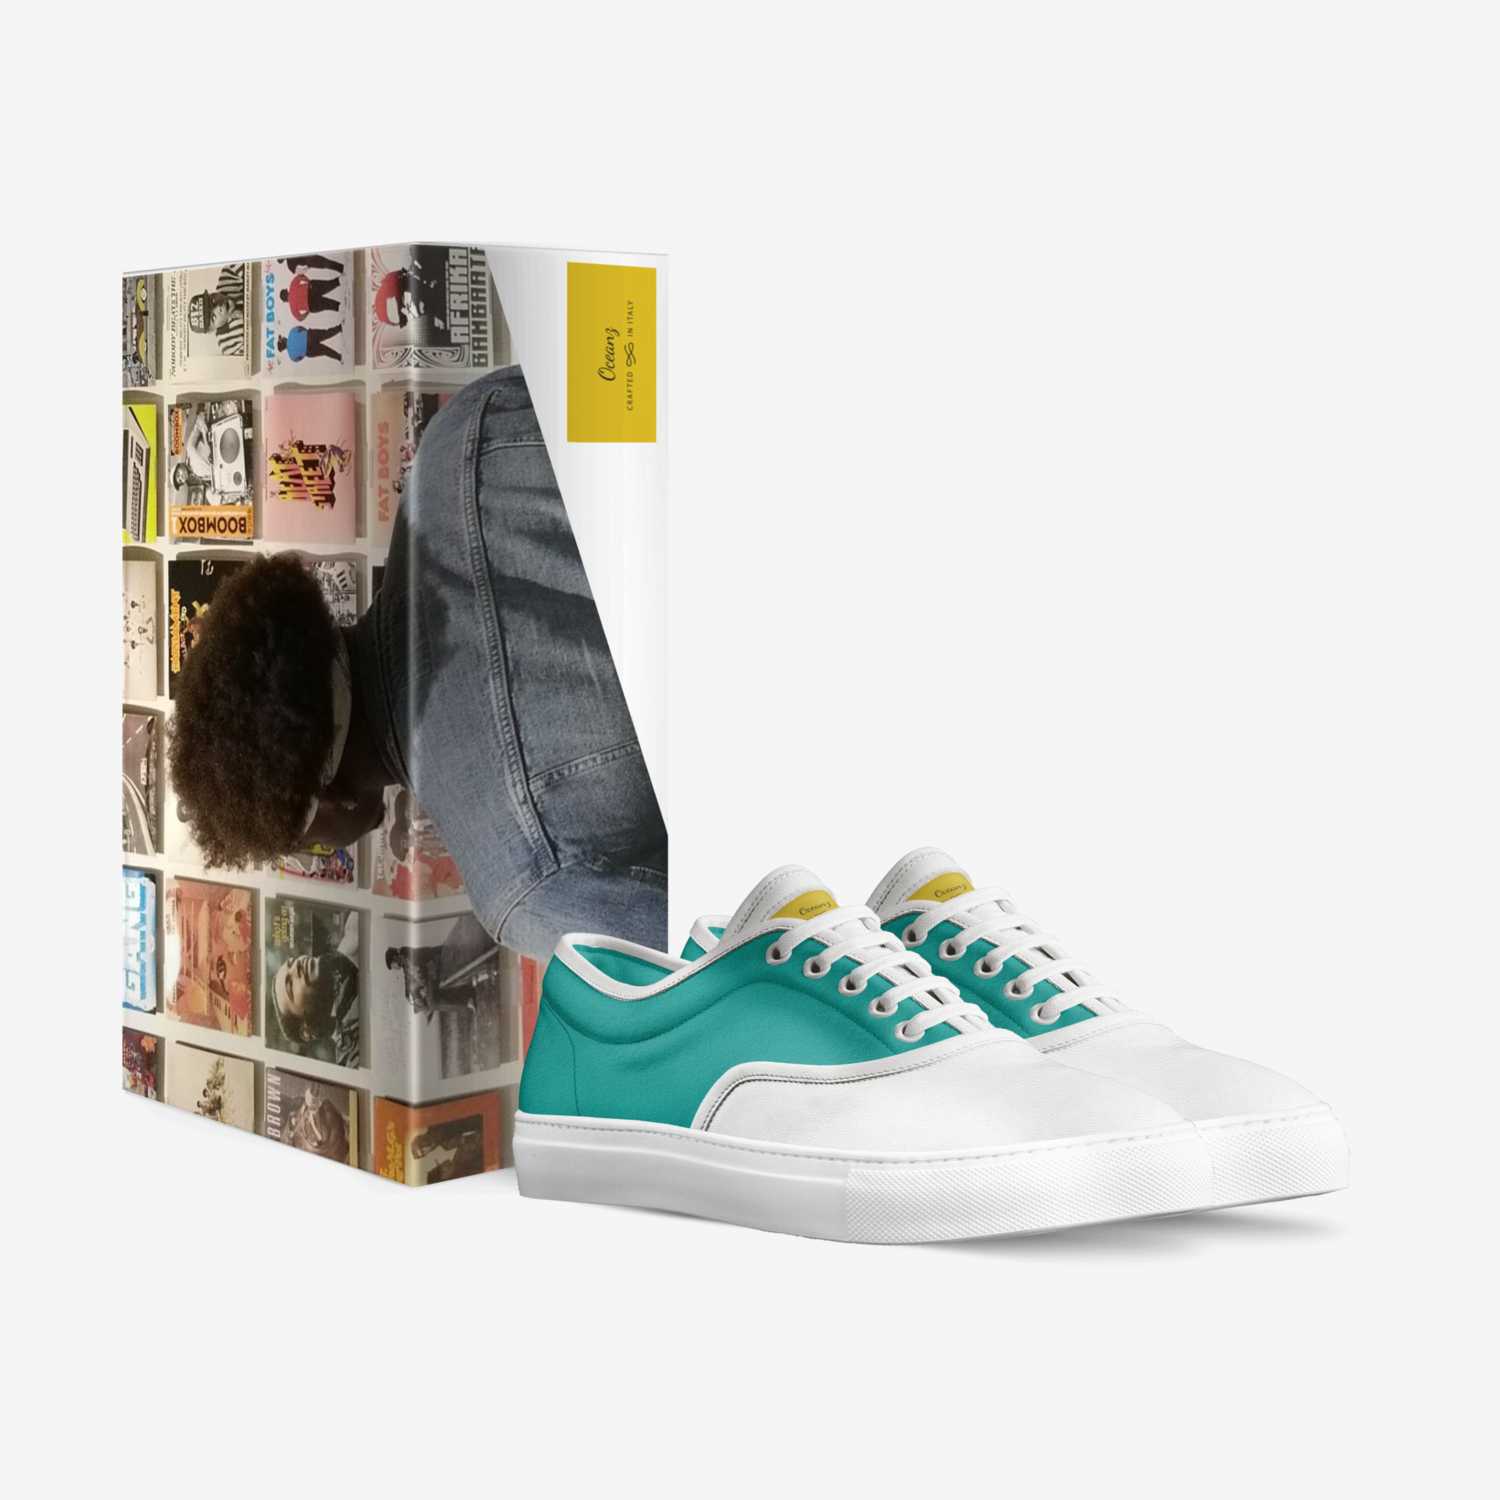 Oceanz custom made in Italy shoes by James Aaron | Box view